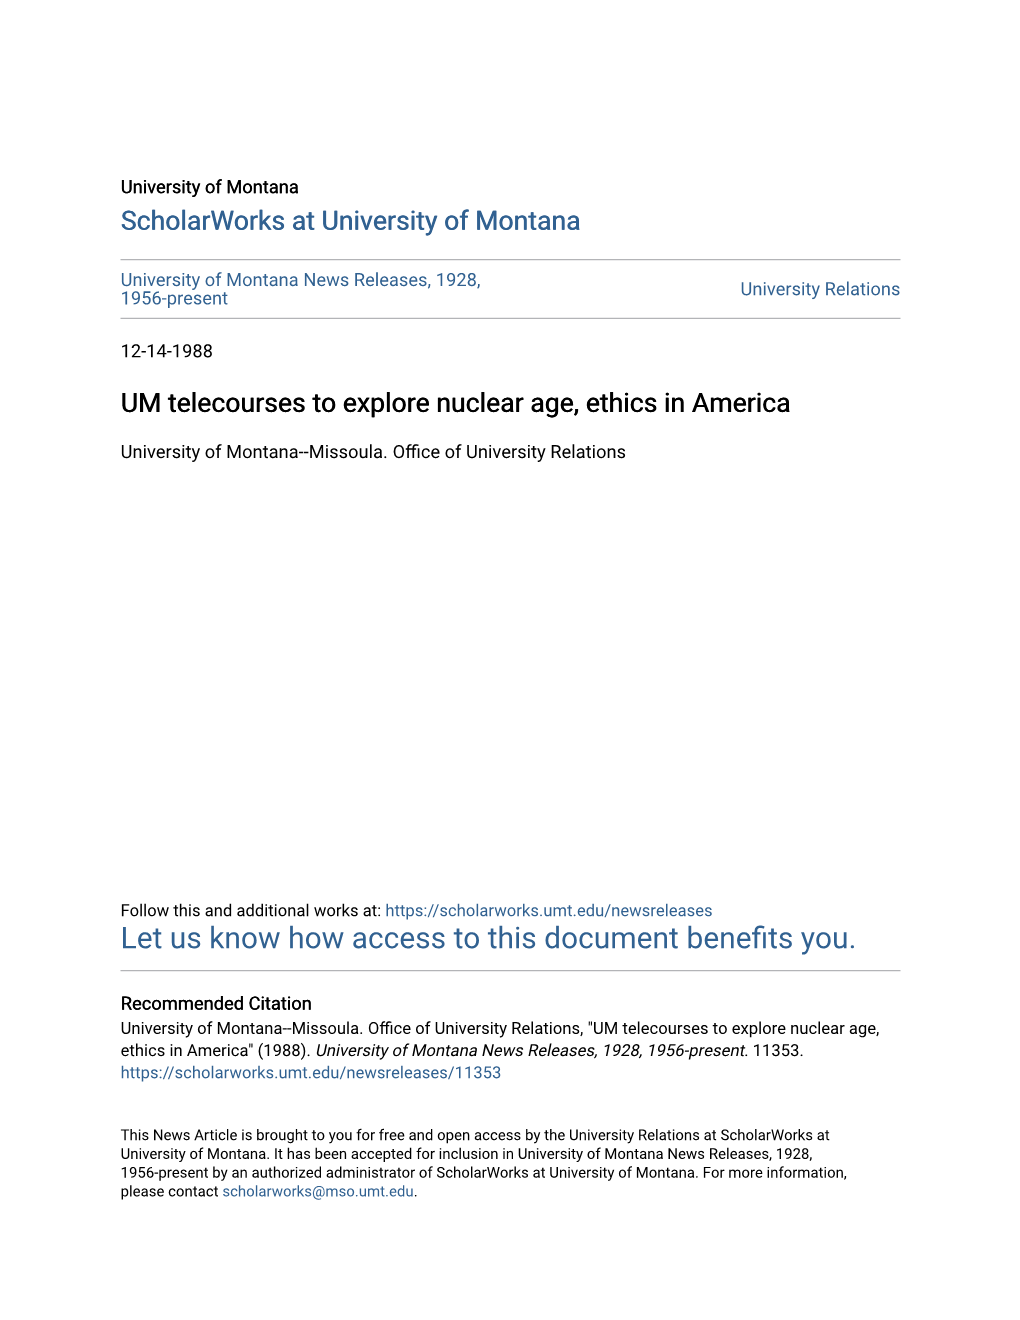 UM Telecourses to Explore Nuclear Age, Ethics in America